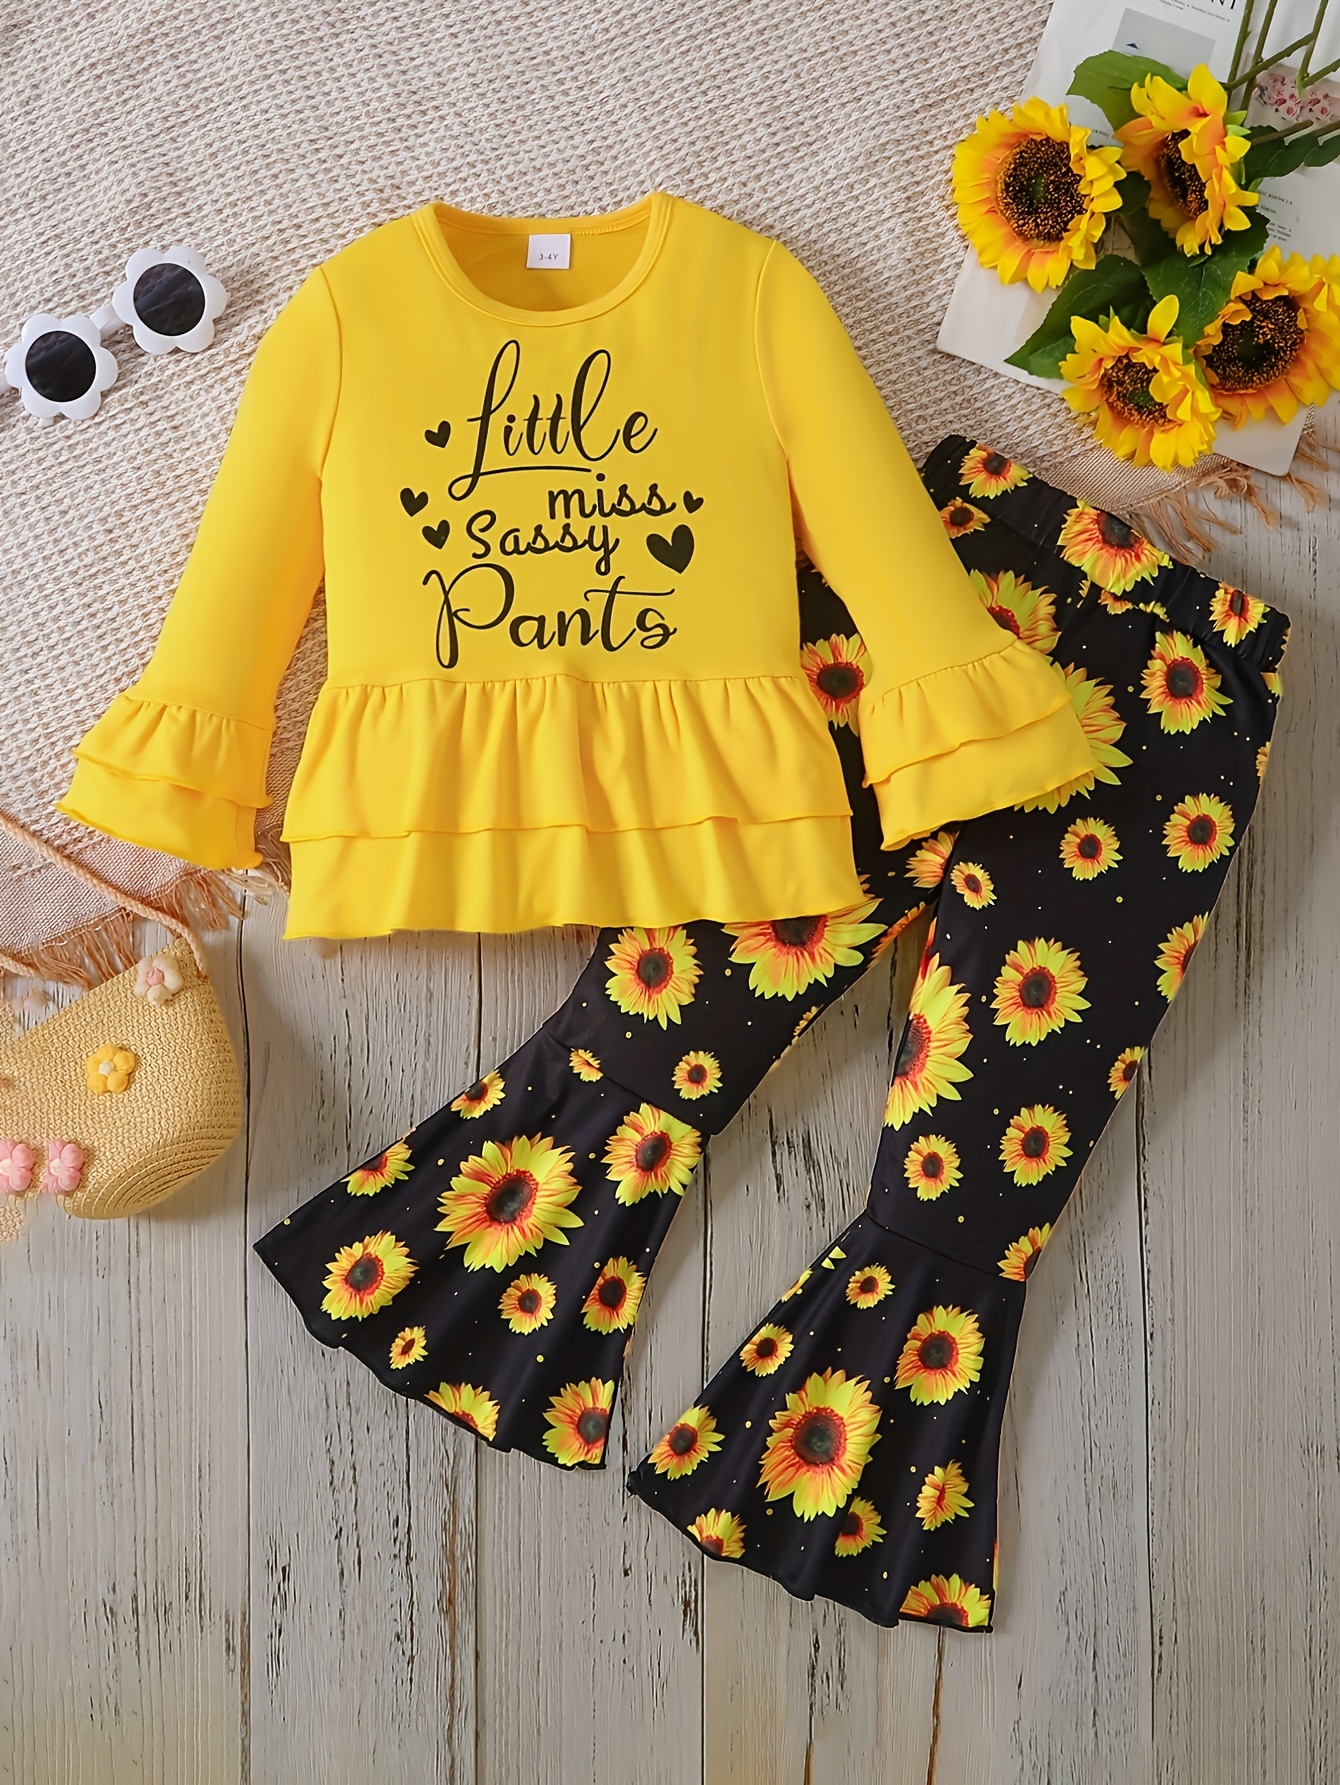 Boutique Tracksuit for Children Outfits Teenagers Kids Clothes